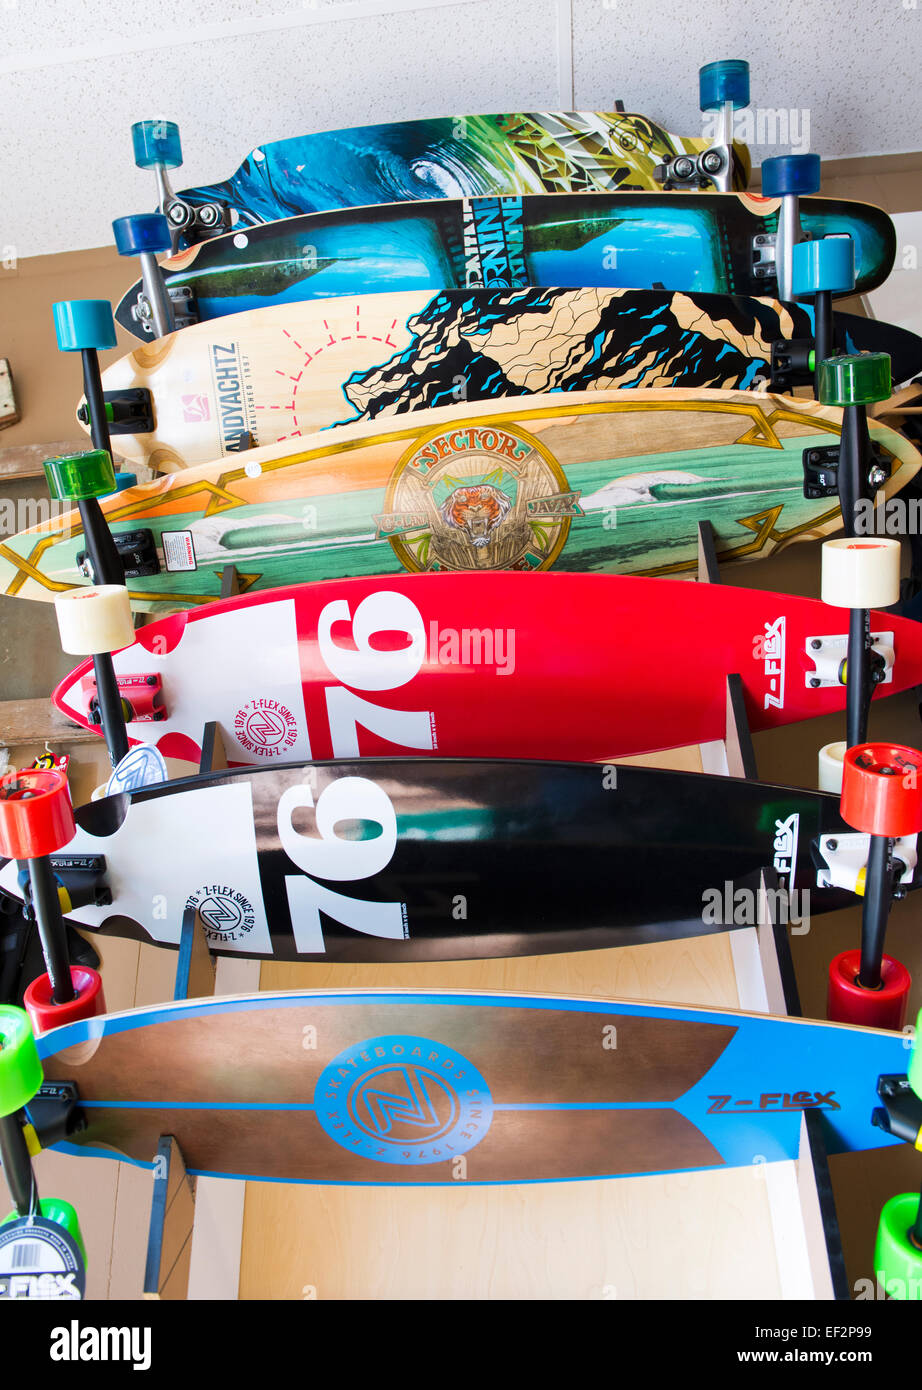 Low angle perspective of a longboard skateboard display Stock Photo